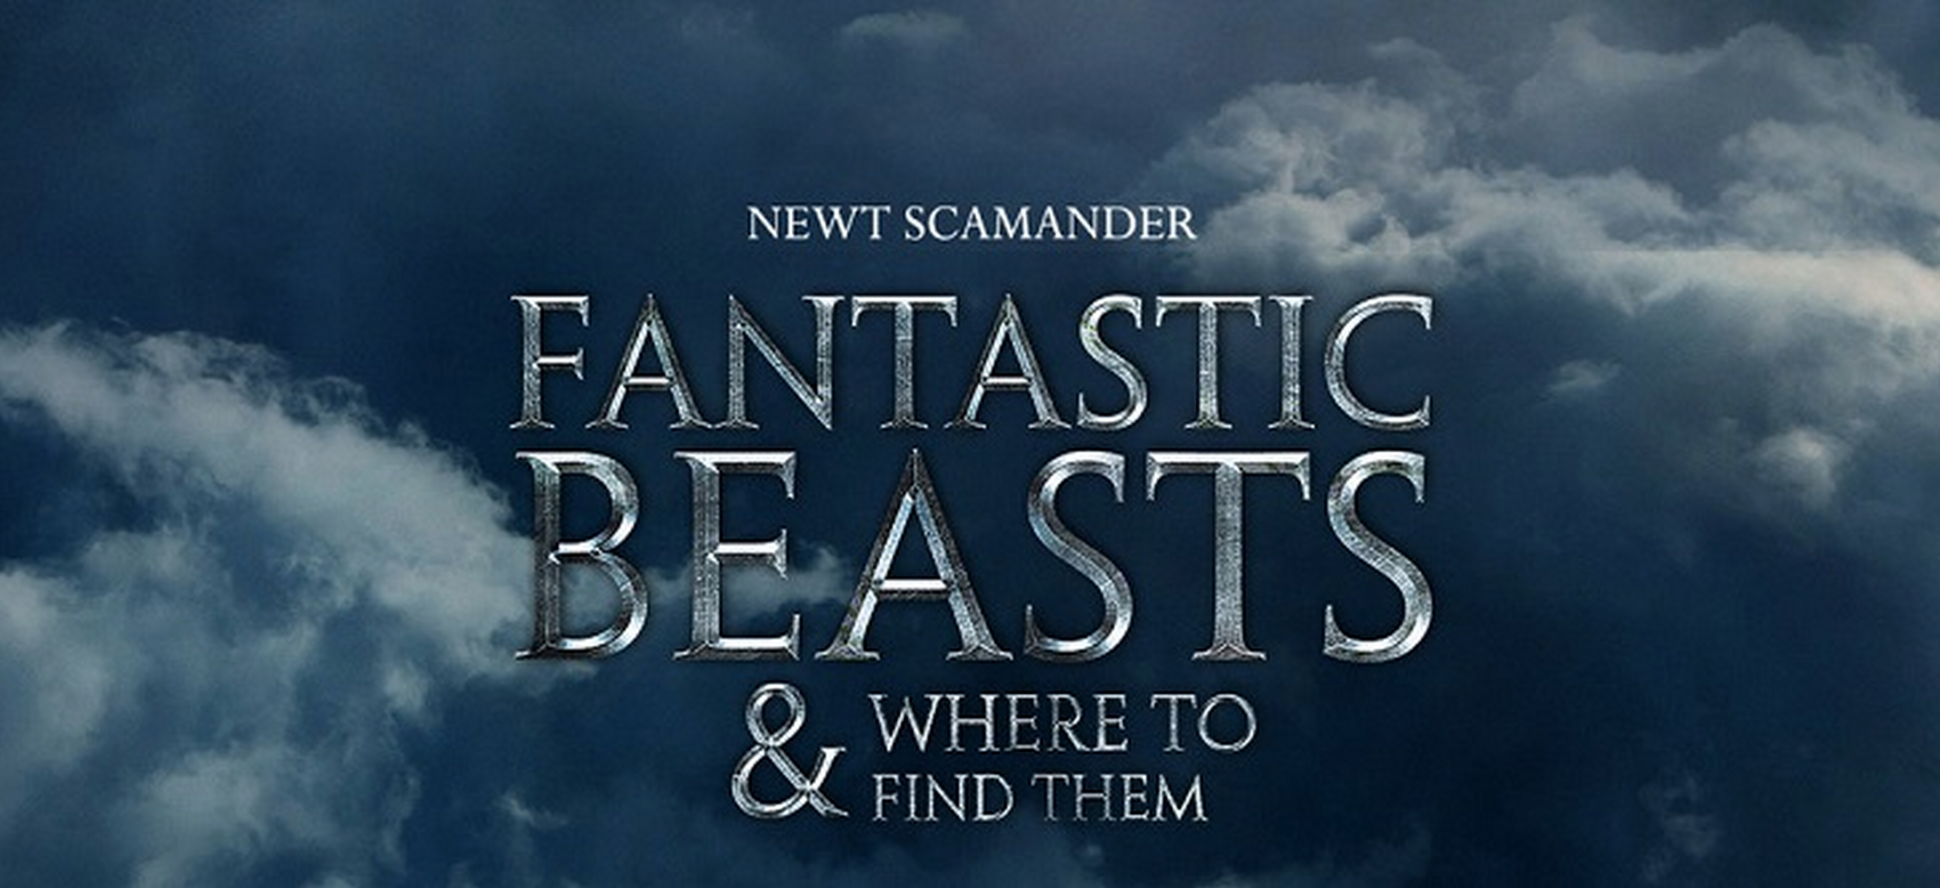 Filming gets underway on ‘Fantastic Beasts and Where to Find Them’